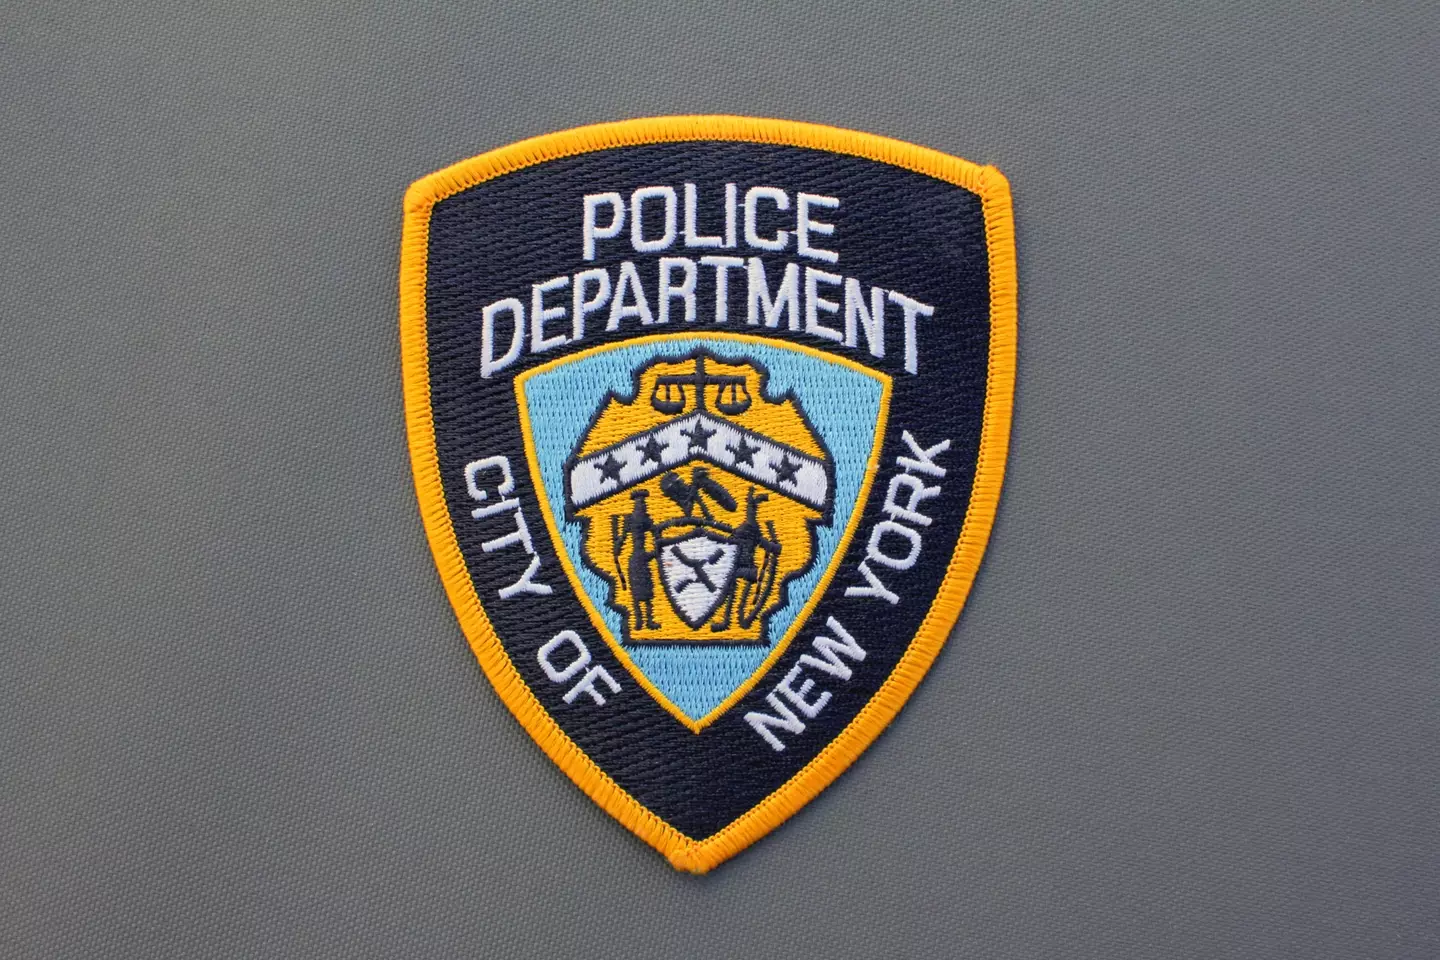 The NYPD has yet to comment on the case. (Alamy)